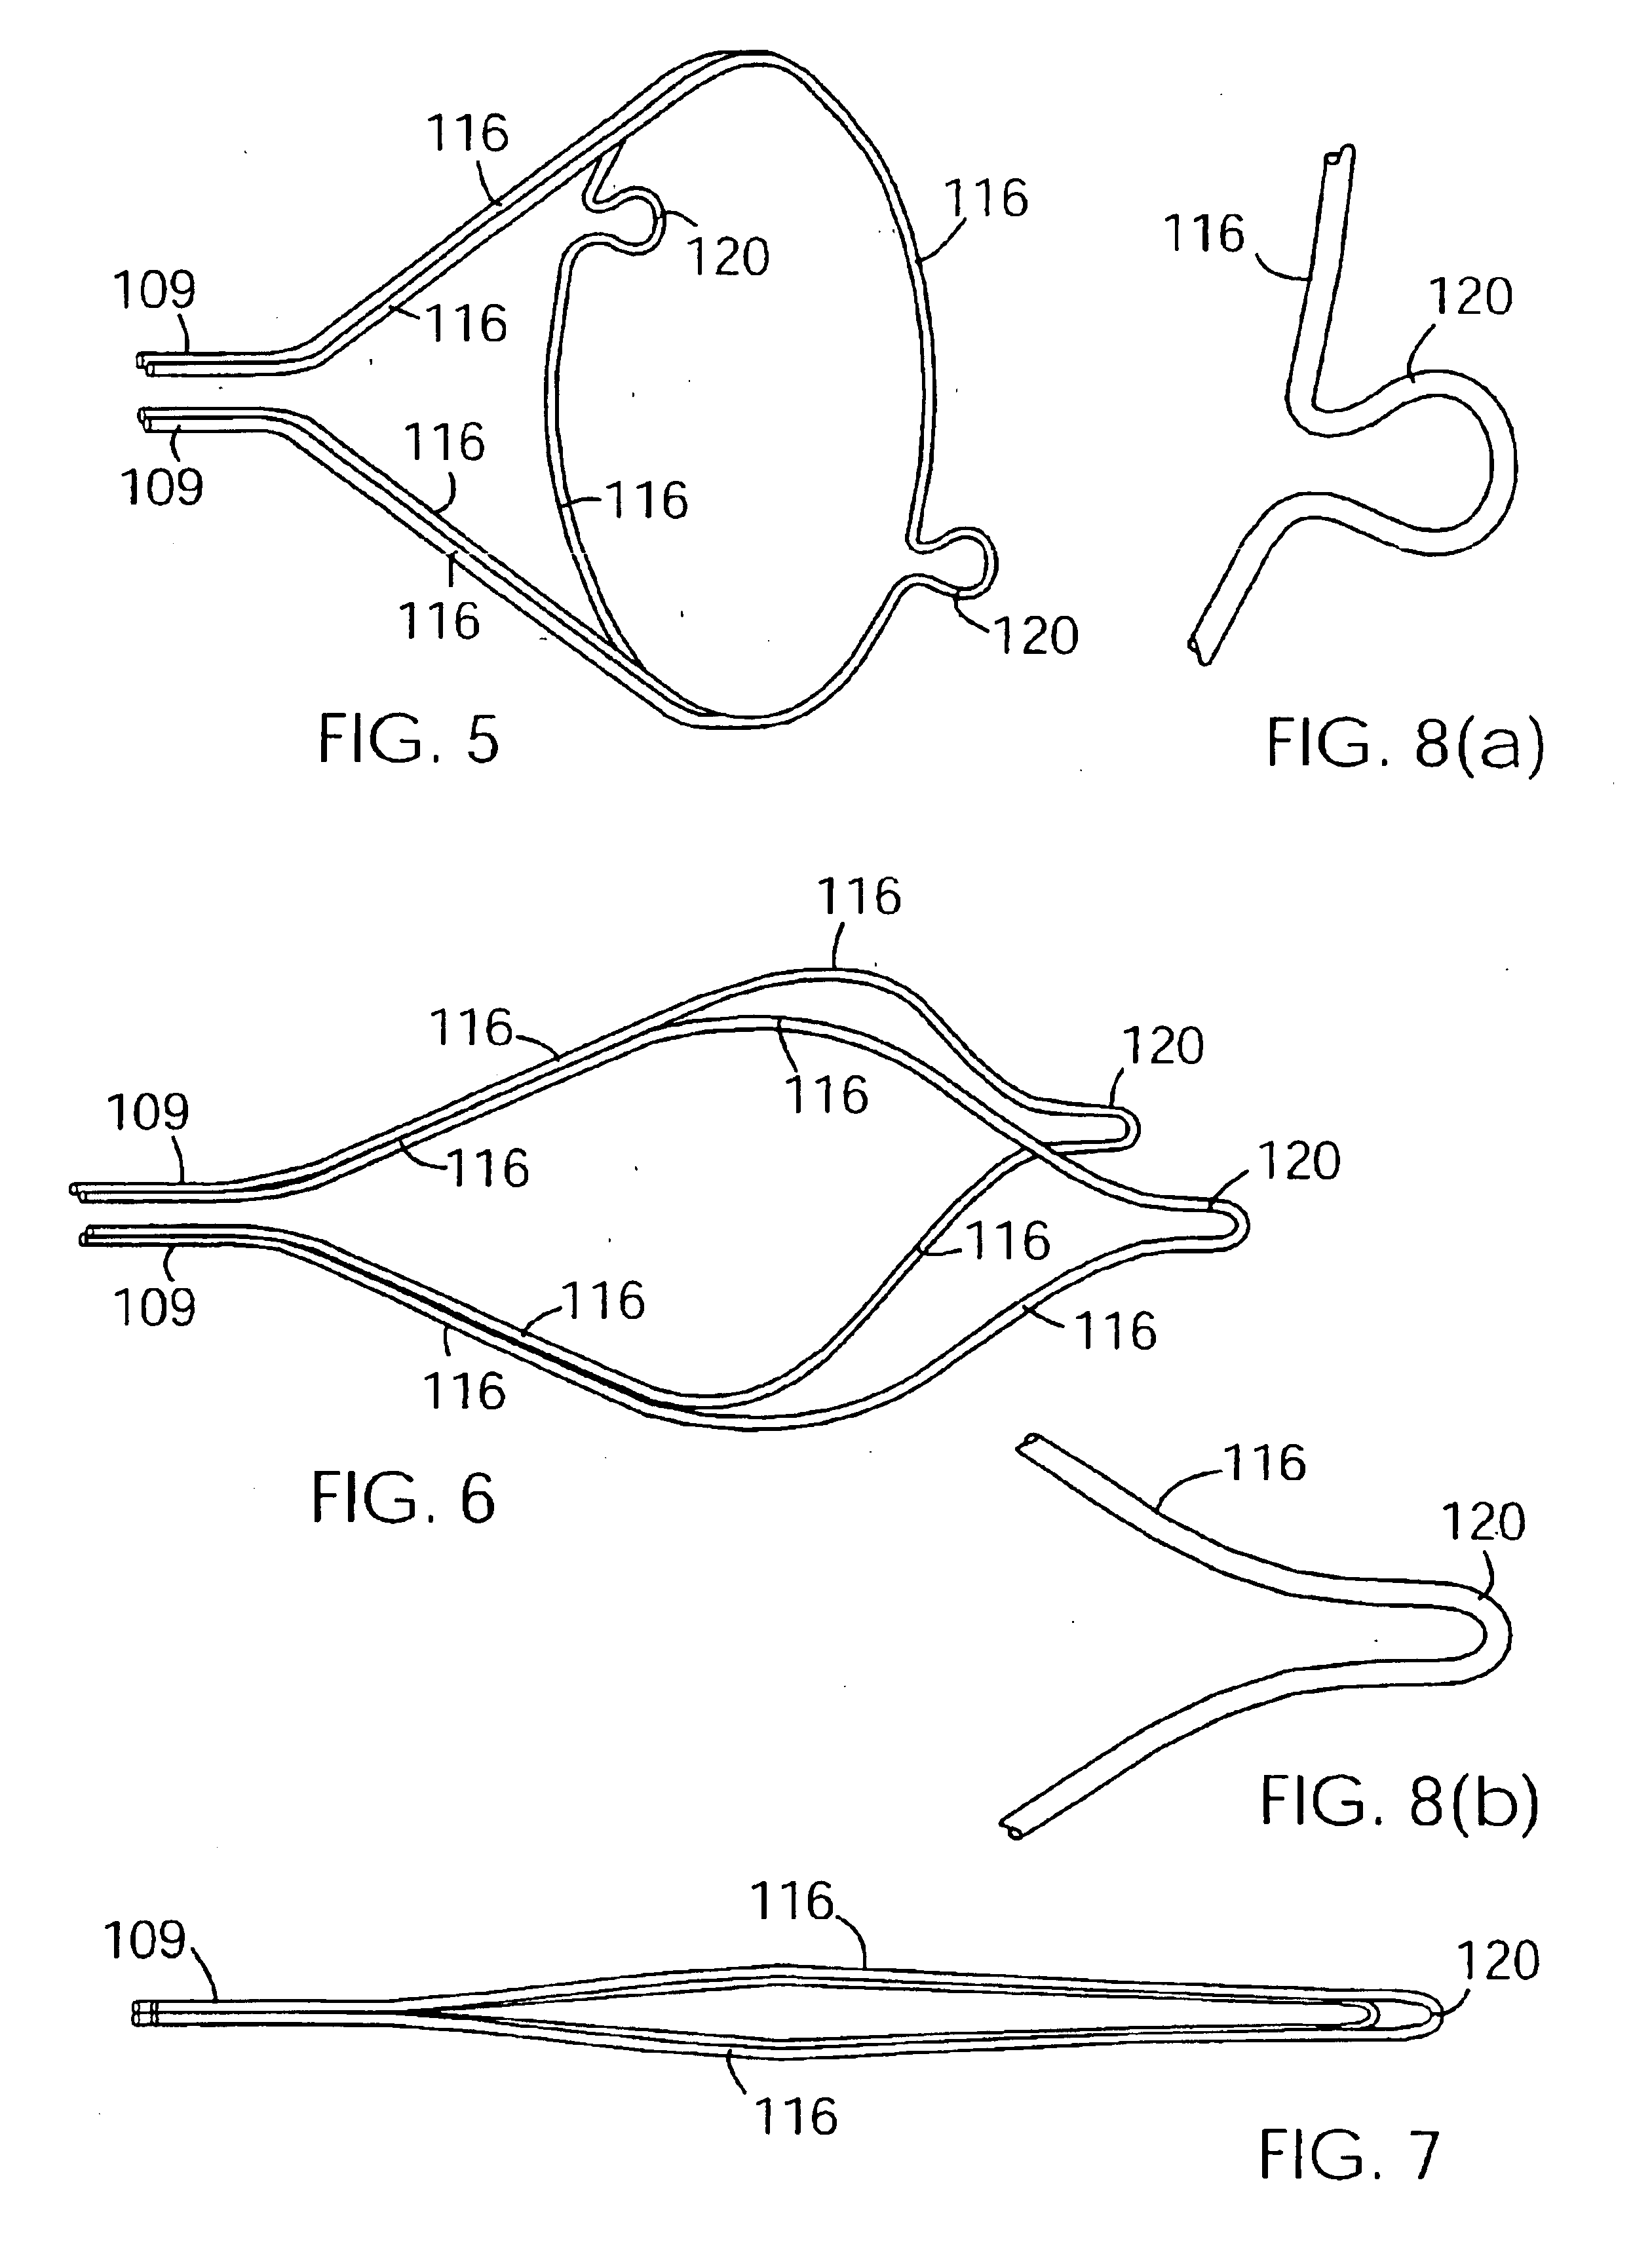 Support frame for an embolic protection device